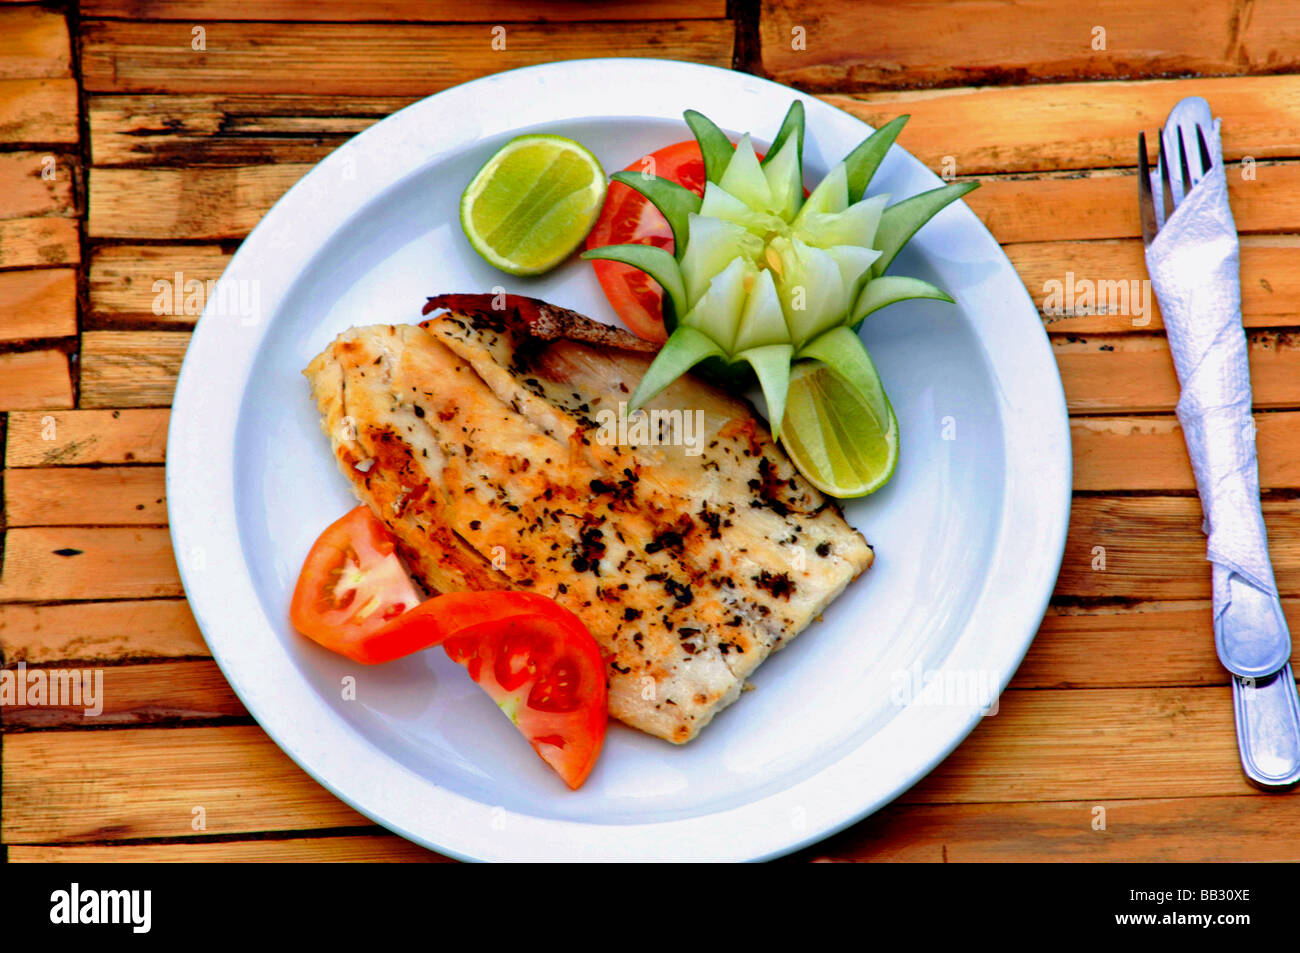 Plate of delicious healthy cuisine containing tropical fish fruit and vegetables served outdoors on a rustic bamboo table Stock Photo